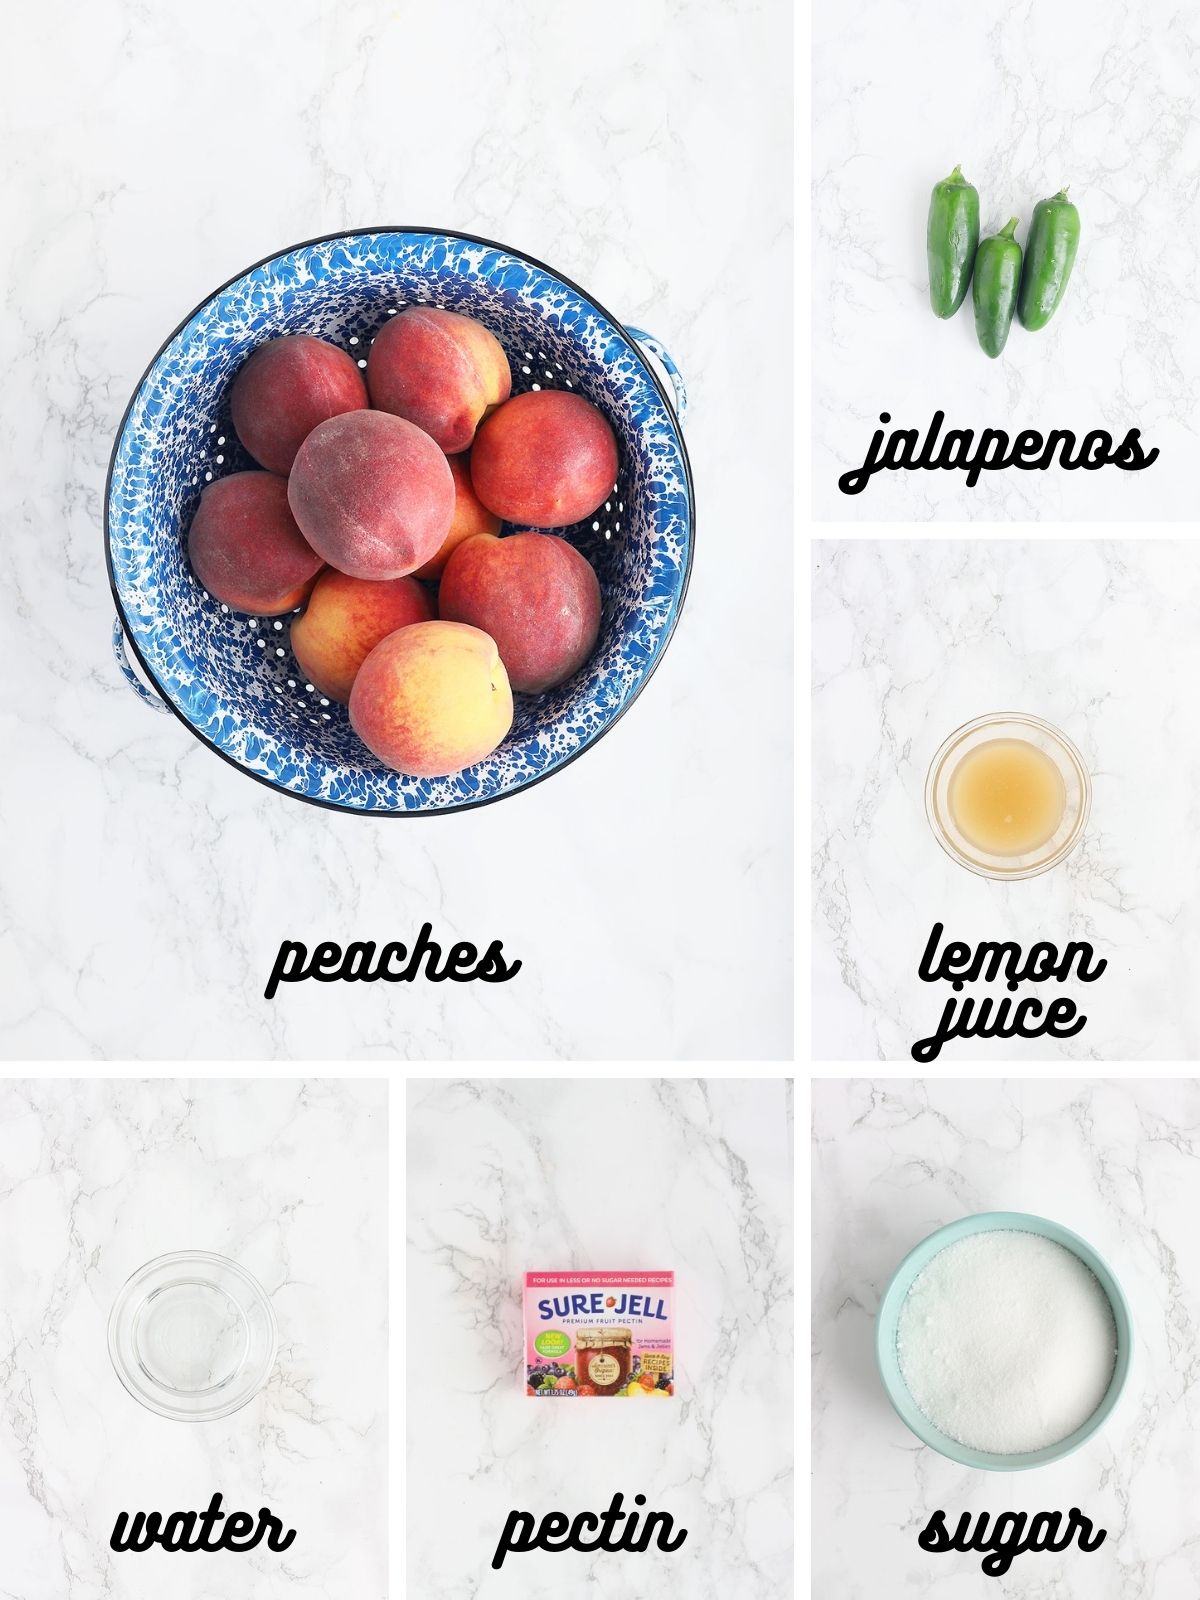 peach jalapeno jam ingredients include peaches, jalapeno peppers, lemon juice, water, pectin and sugar